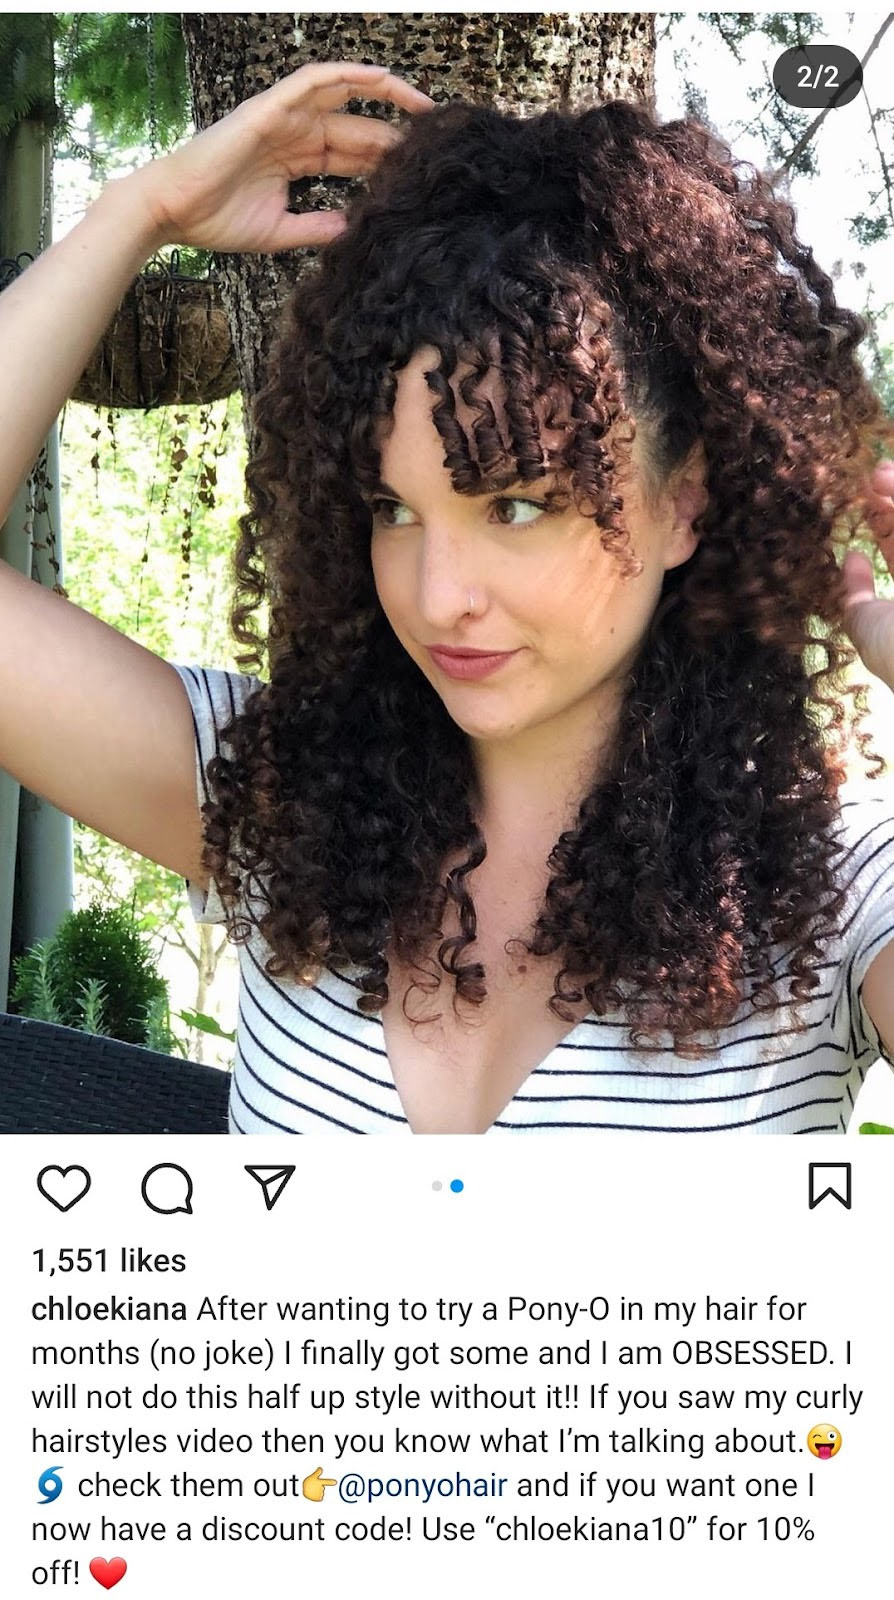 A screenshot showing an Instagram post with a picture of a curly-haired person and its caption advertising a product.